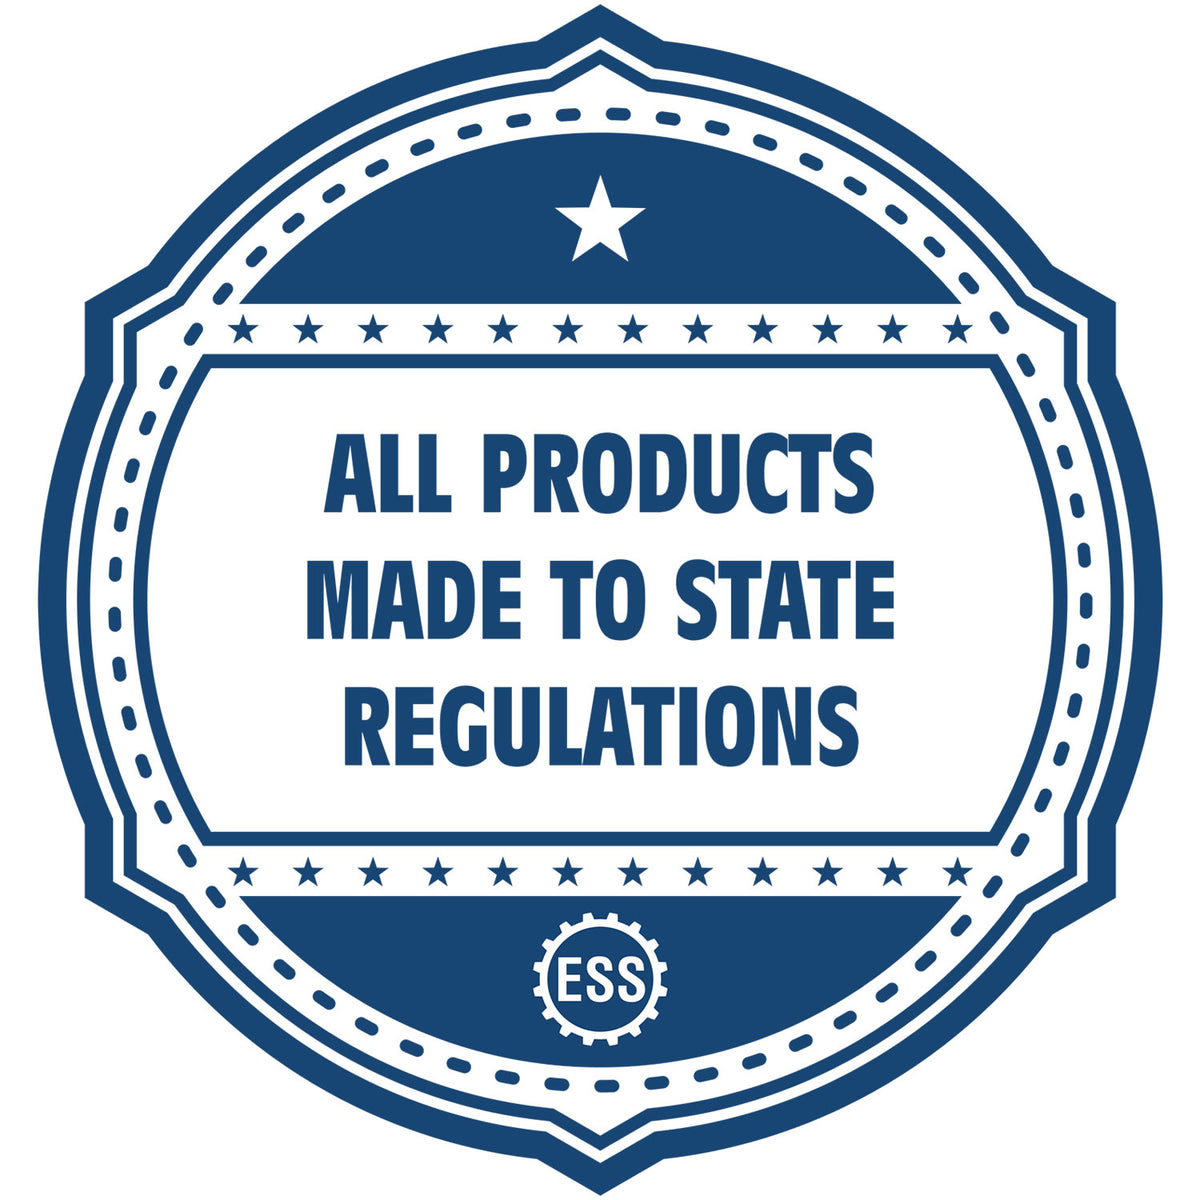 An icon or badge element for the Slim Pre-Inked State Seal Notary Stamp for Virginia showing that this product is made in compliance with state regulations.